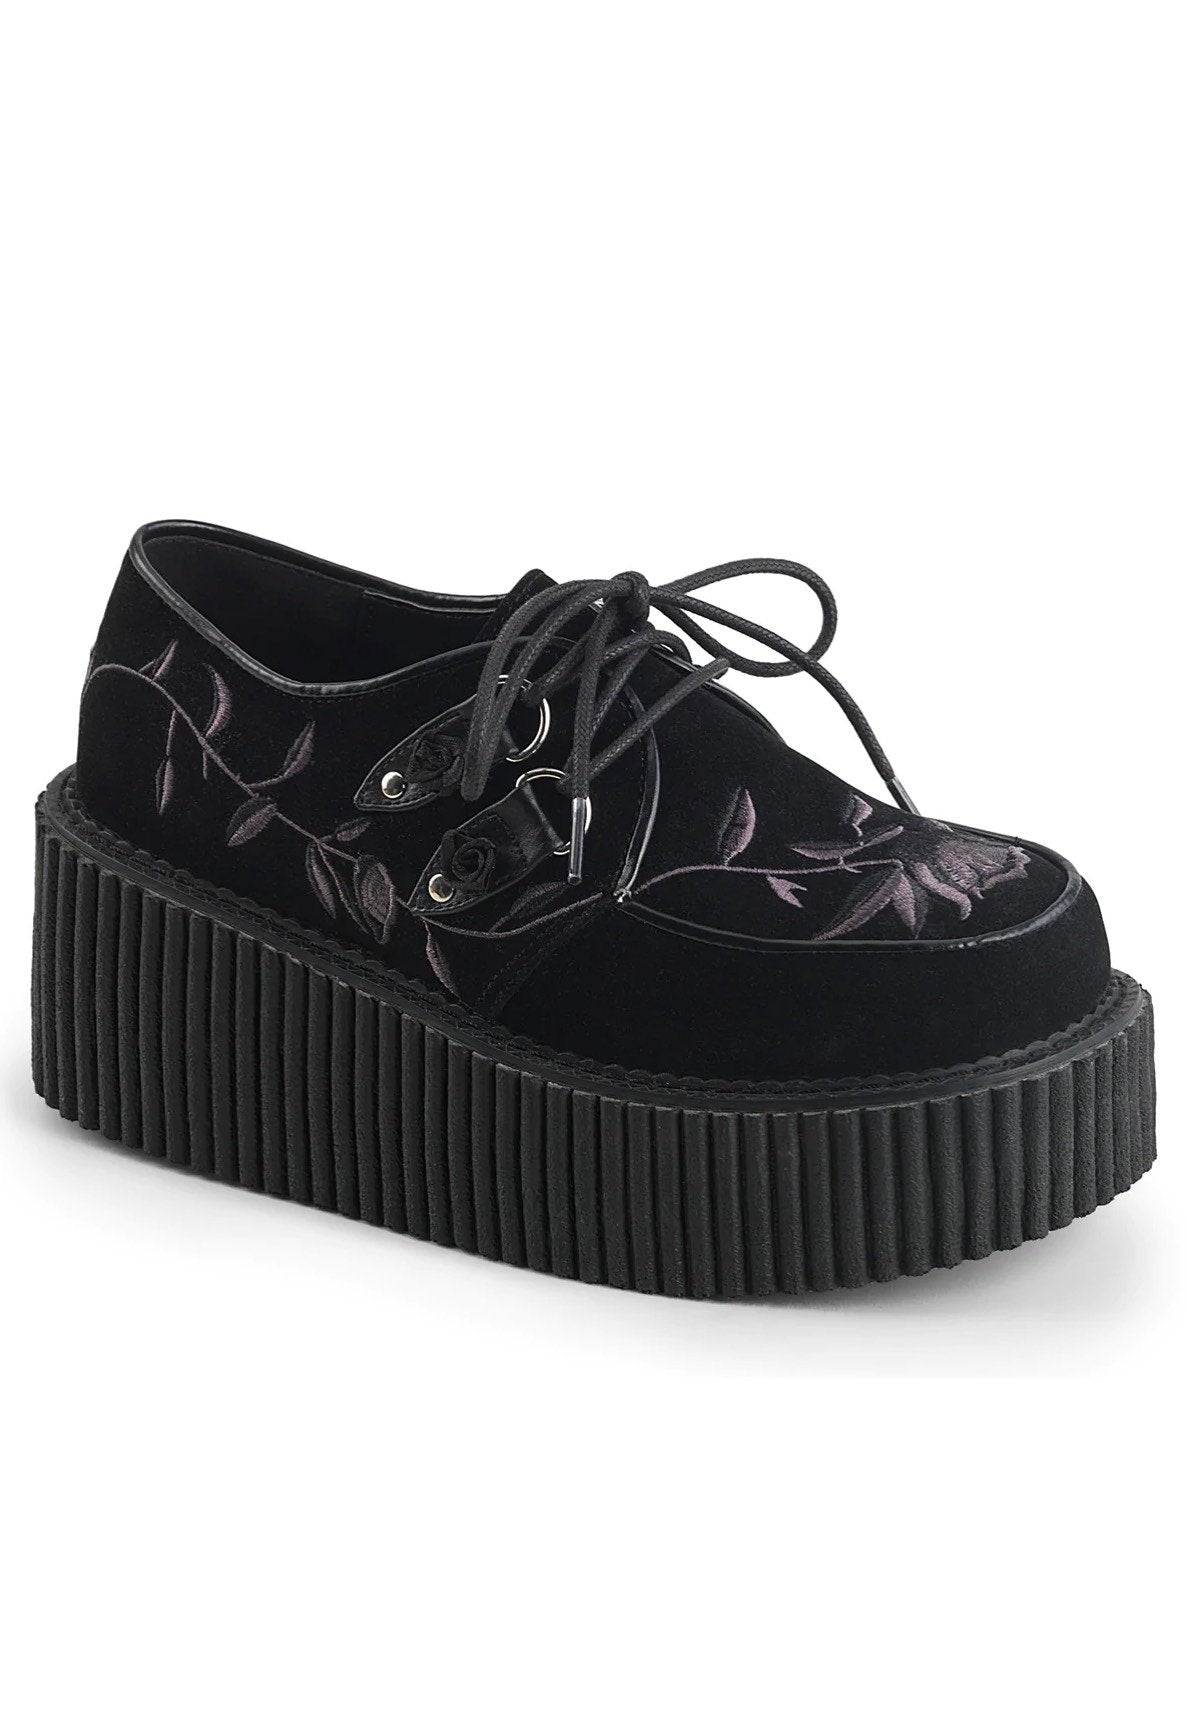 DemoniaCult - Creeper 219 Embroidery Flower - Girl Shoes